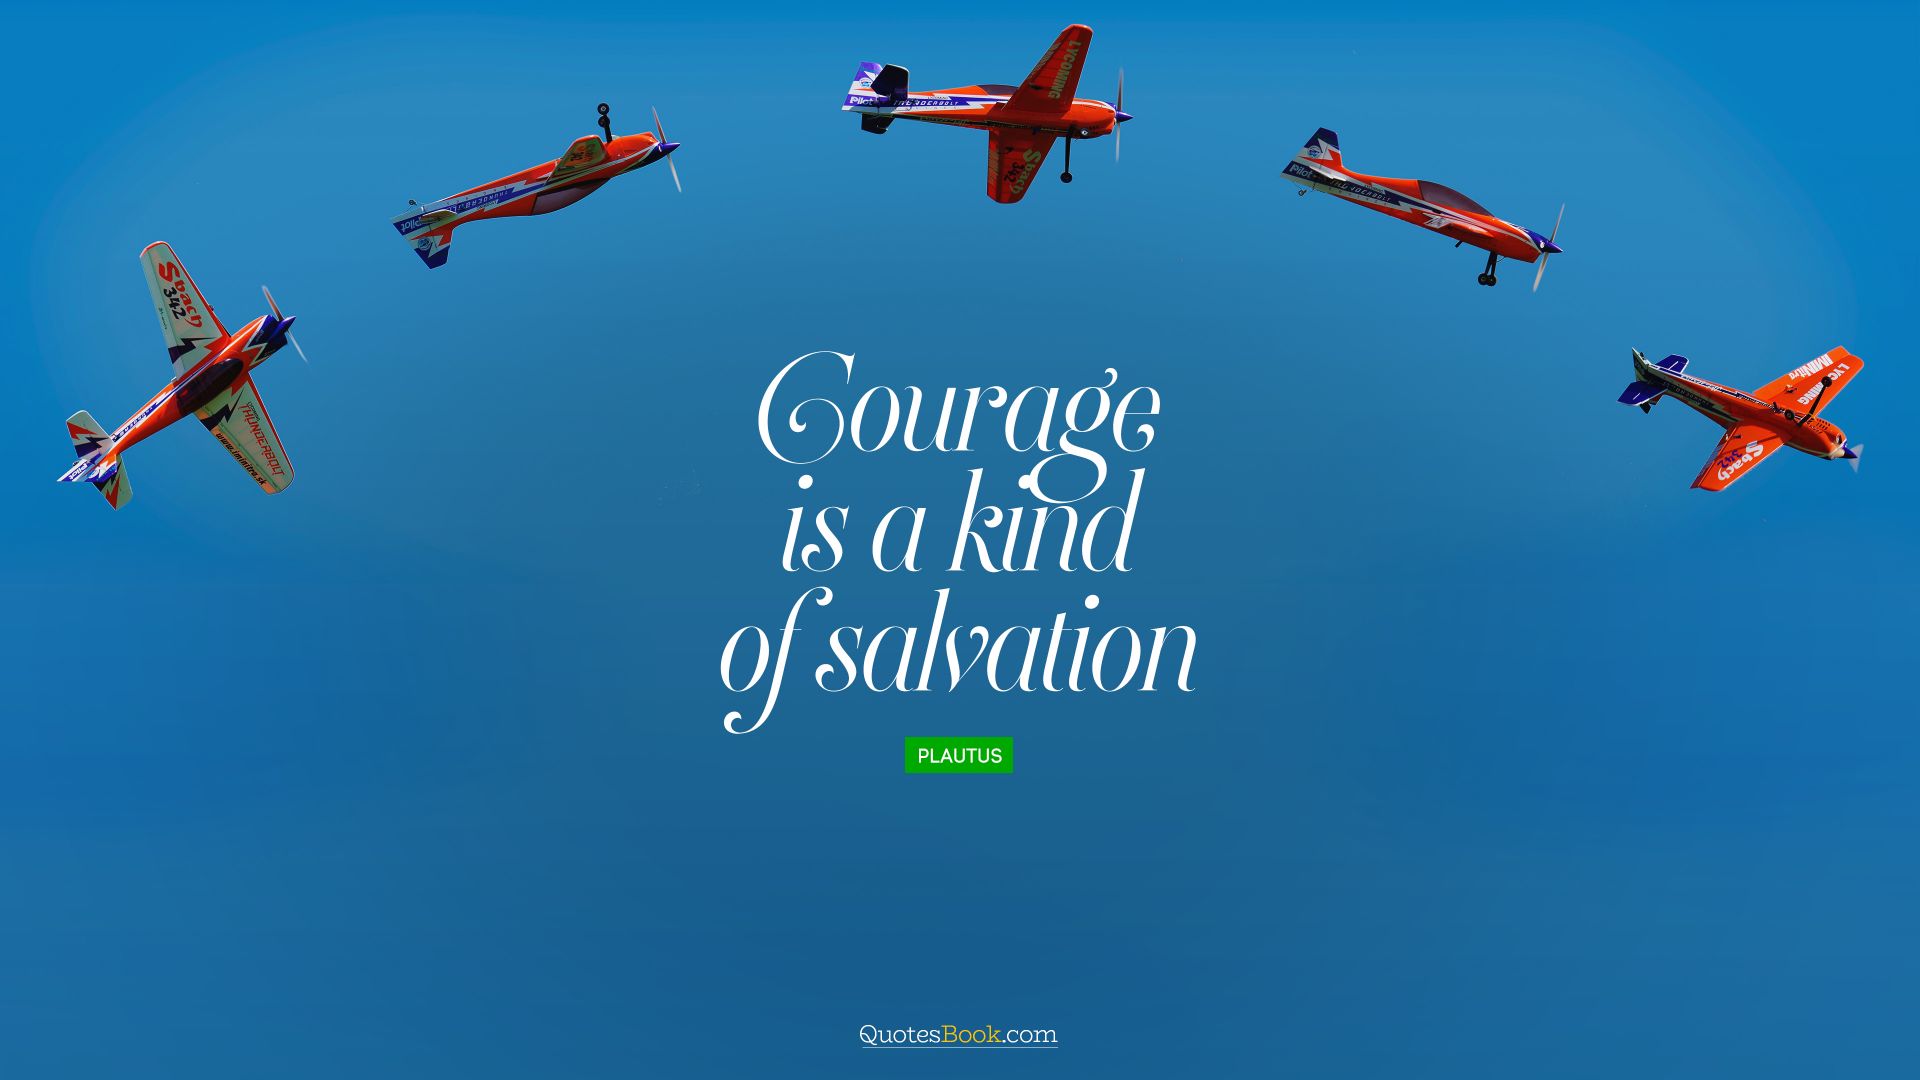 Courage is a kind of salvation. - Quote by Plautus